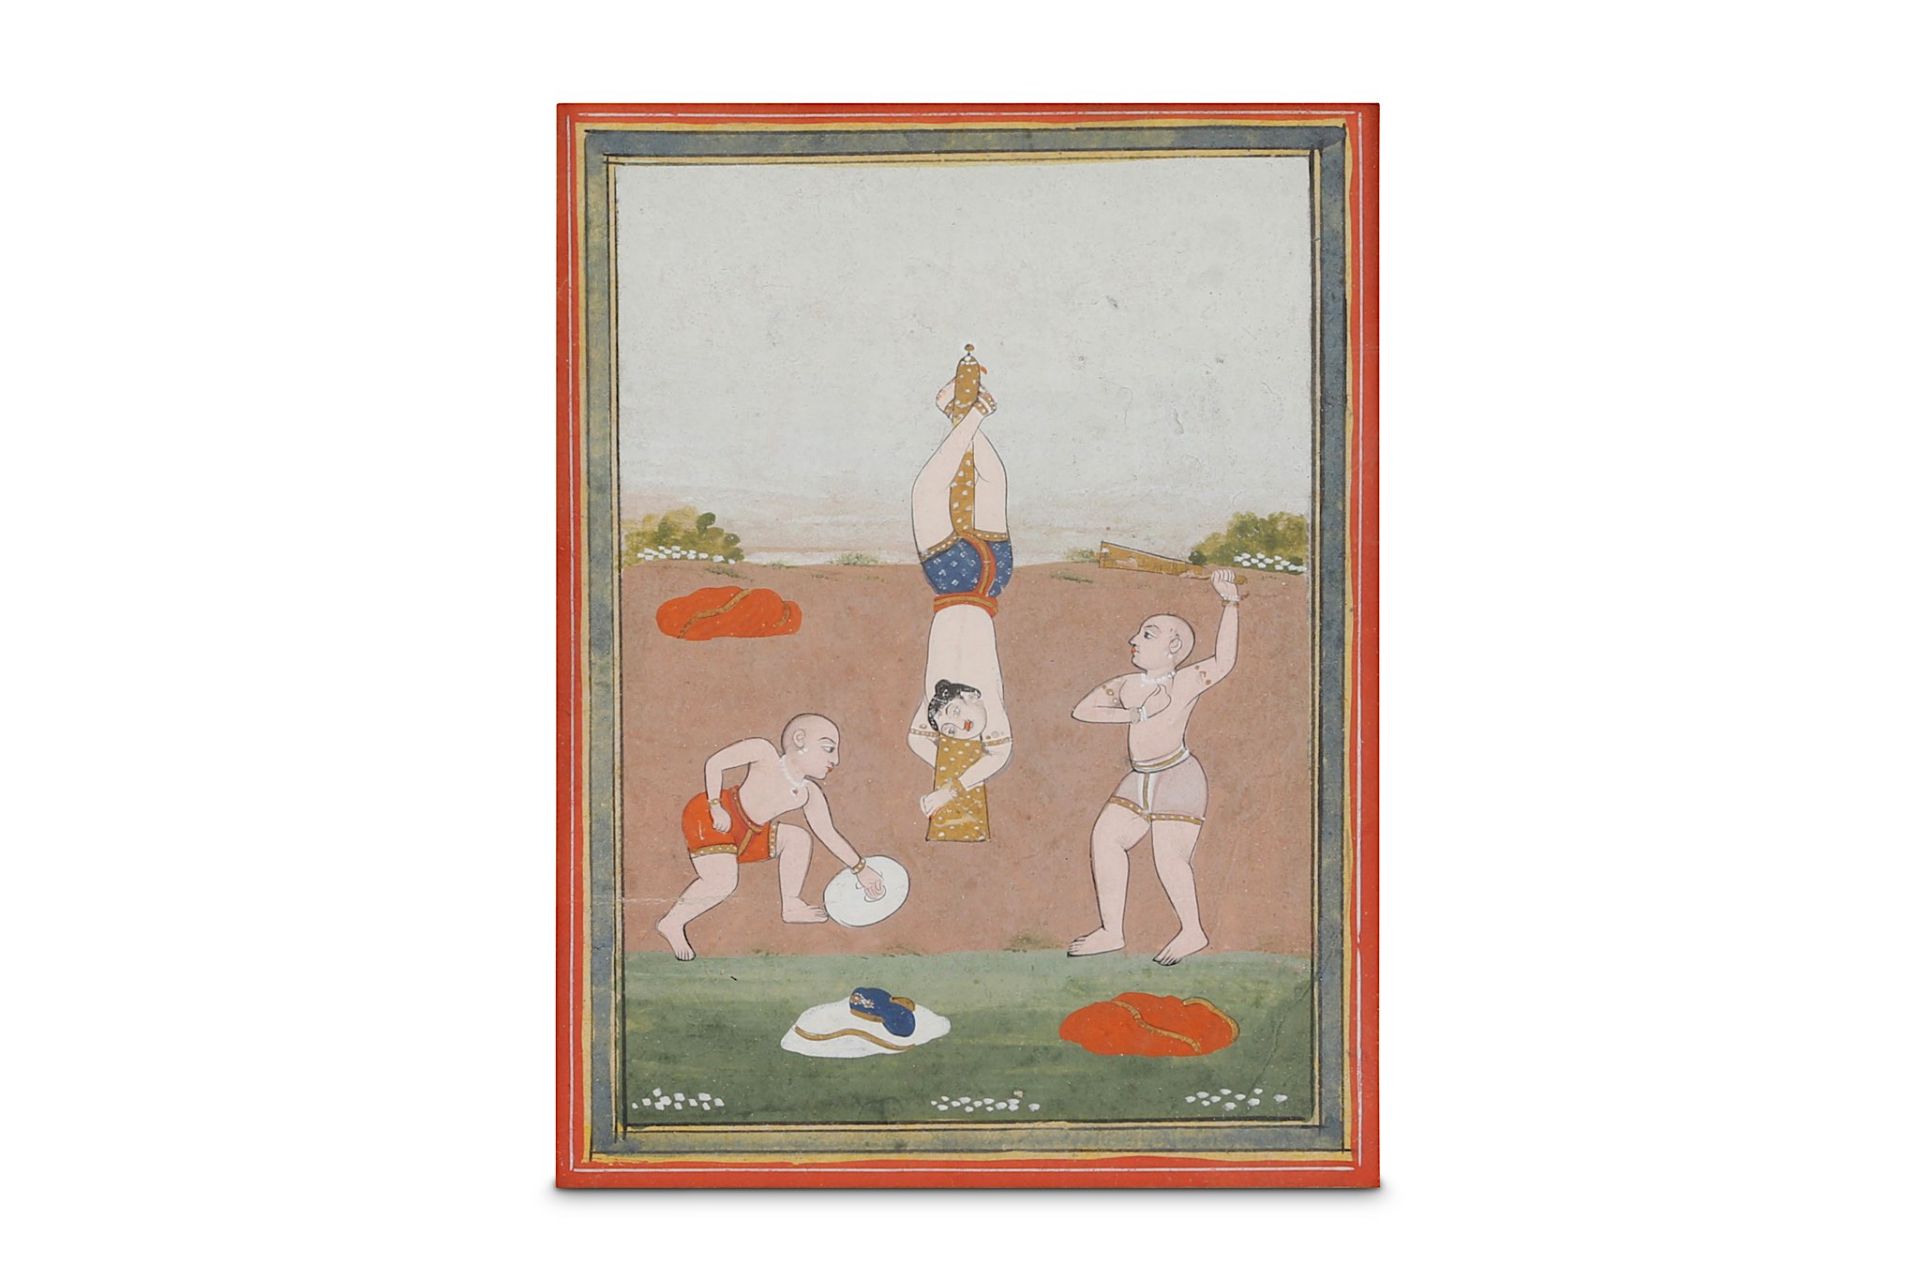 ATHLETES EXERCISING Possibly Mewar, Northern India, late 18th century  Opaque pigments on paper with